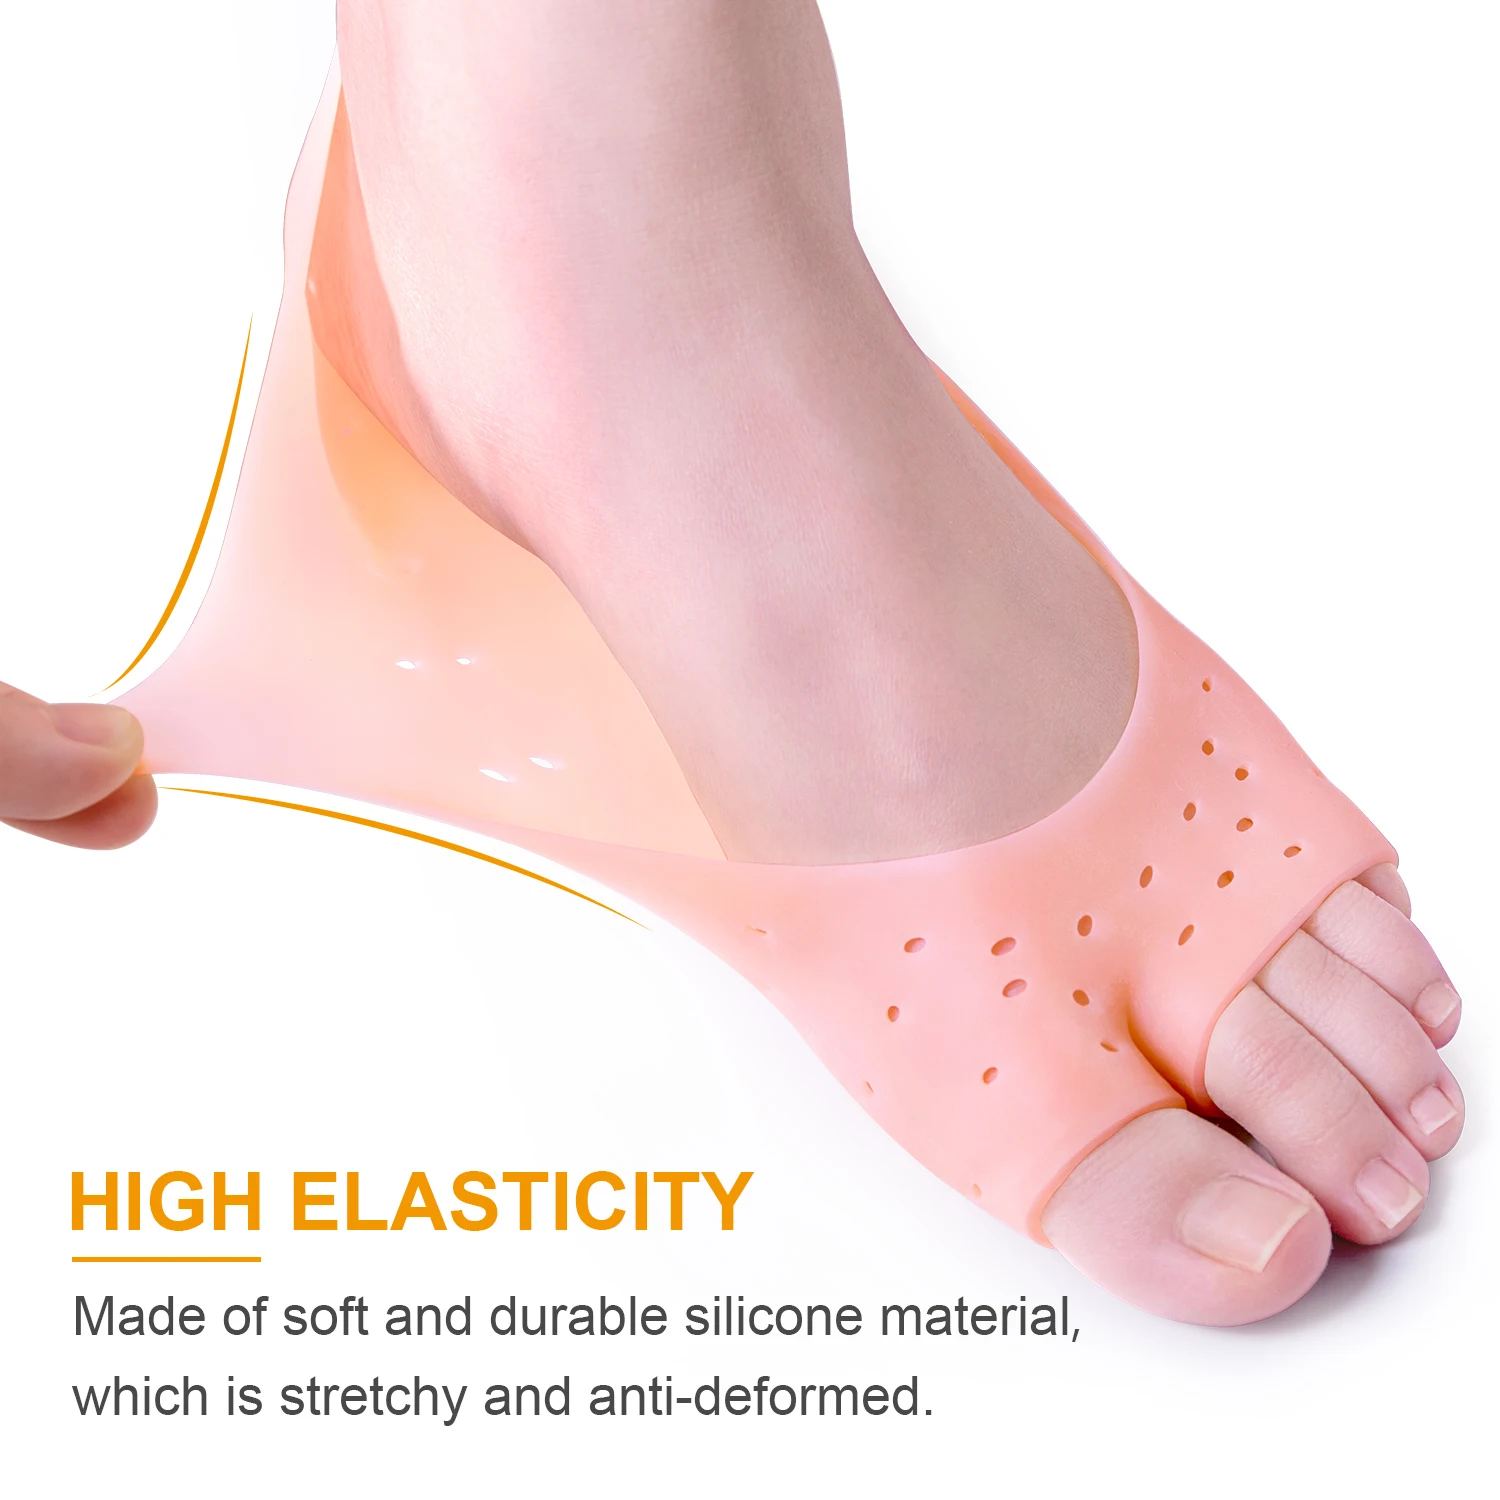 Details about   1 Pair Soft Silicone Foot Care Heel Socks Cracked Skin Protective Foot Heel S5L4 